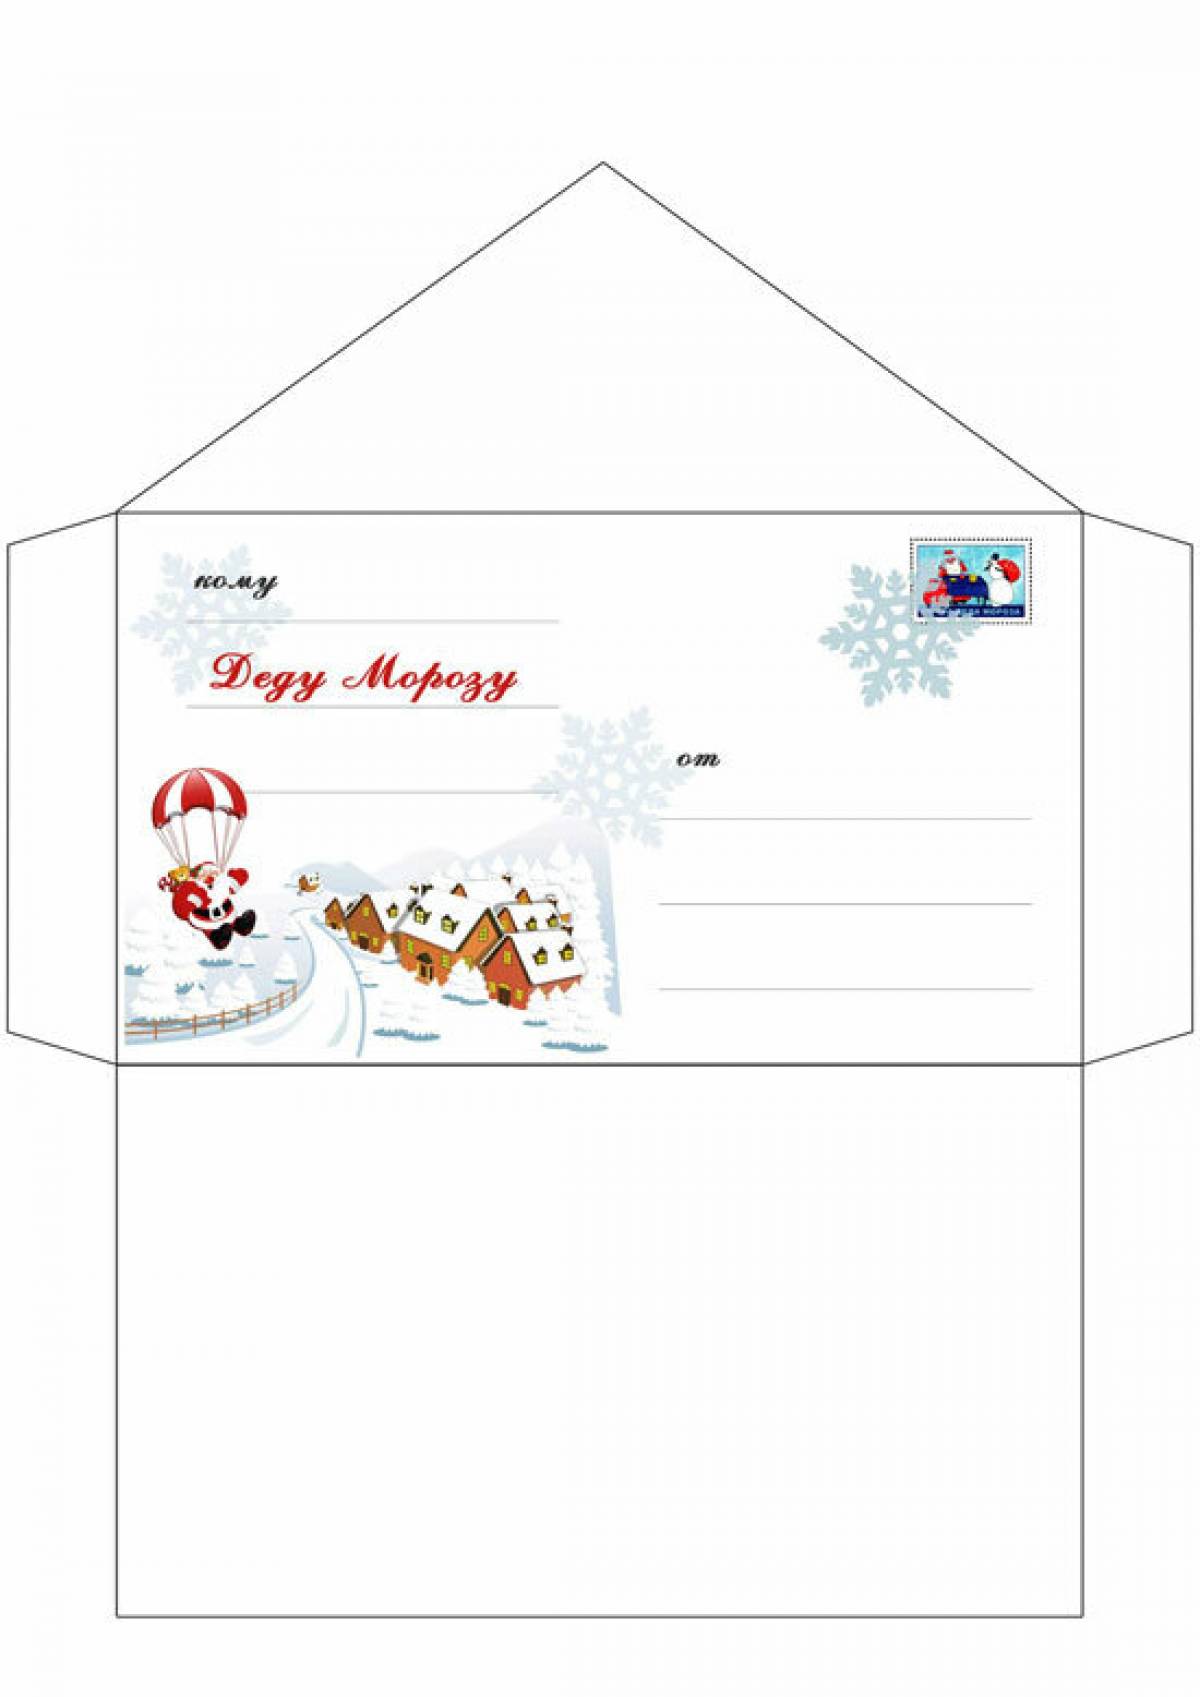 Envelope to Santa Claus at home in the snow